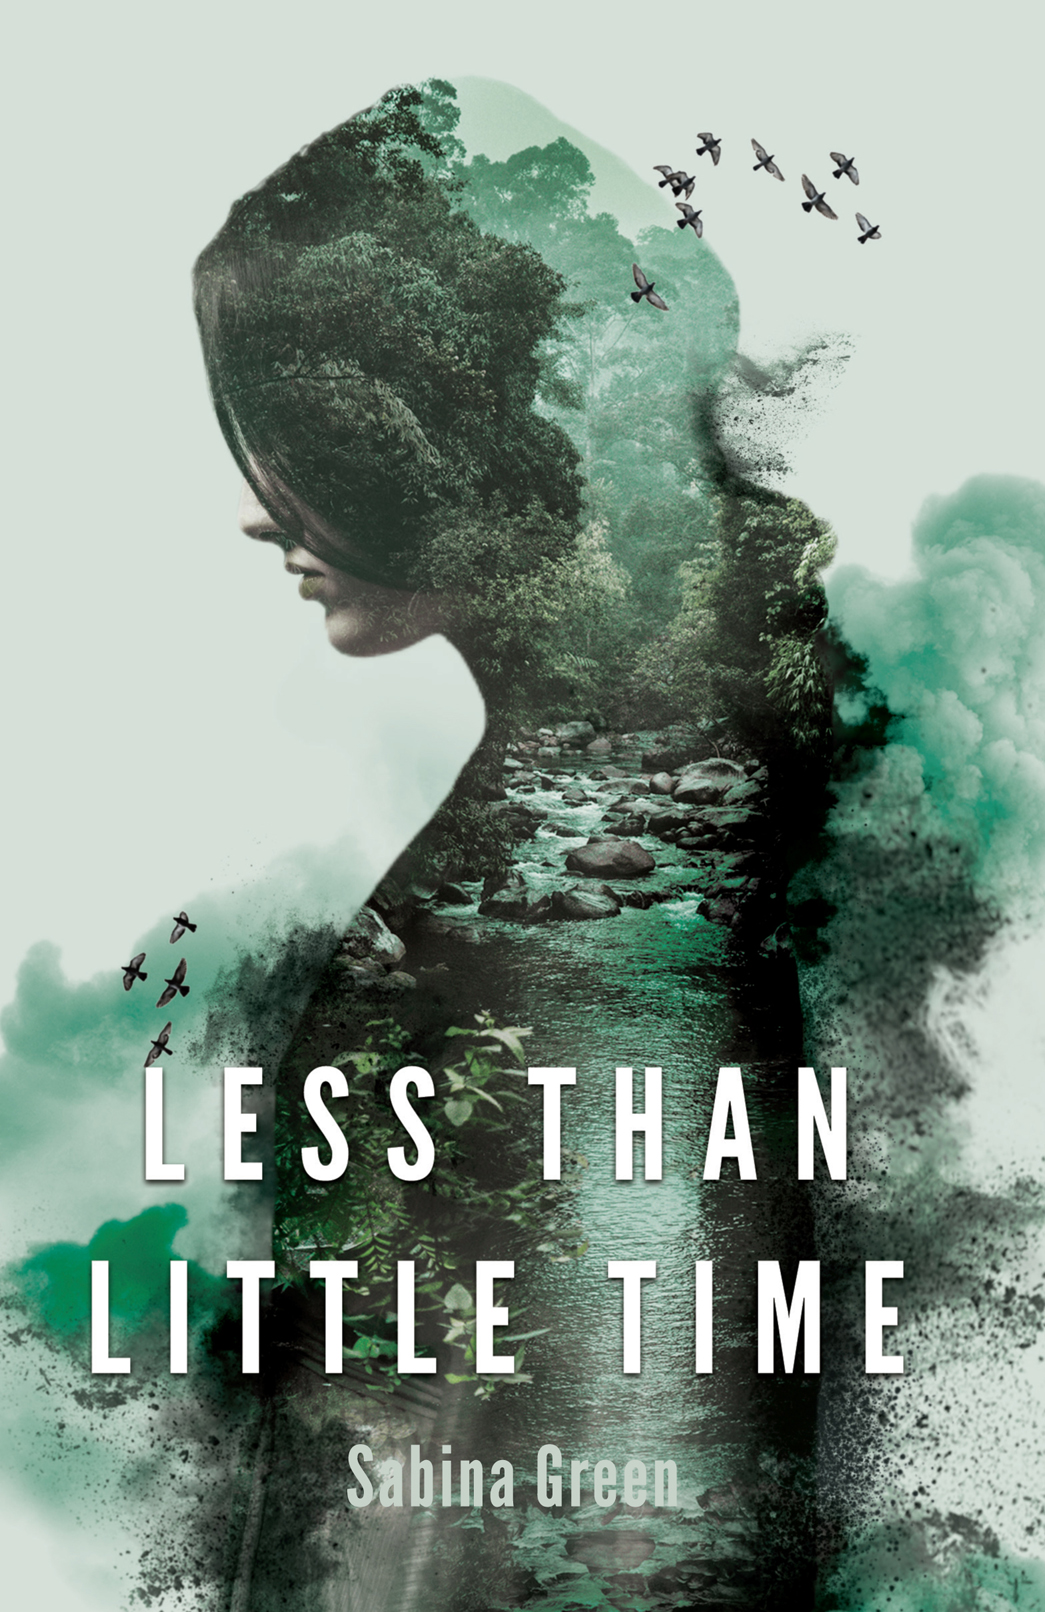 FREE: Less Than Little Time by Sabina Green